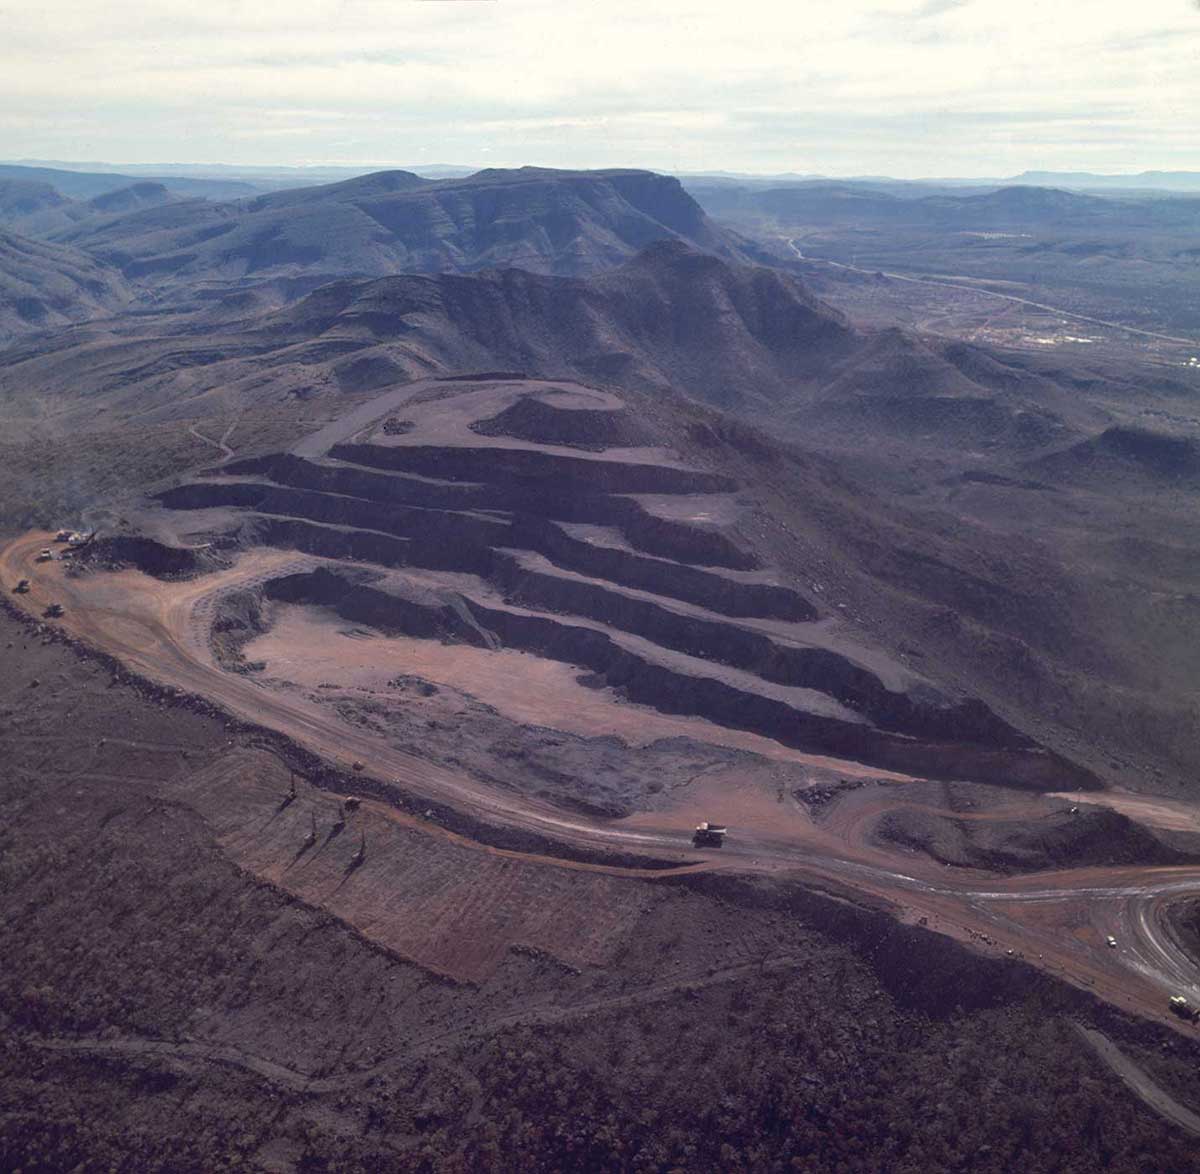 Aerial photo of an open cut mine carved out of the side of a large hill. Massive mining trucks are visible on the perimeter road. Unsullied countryside and mountains in the foreground and background. - click to view larger image